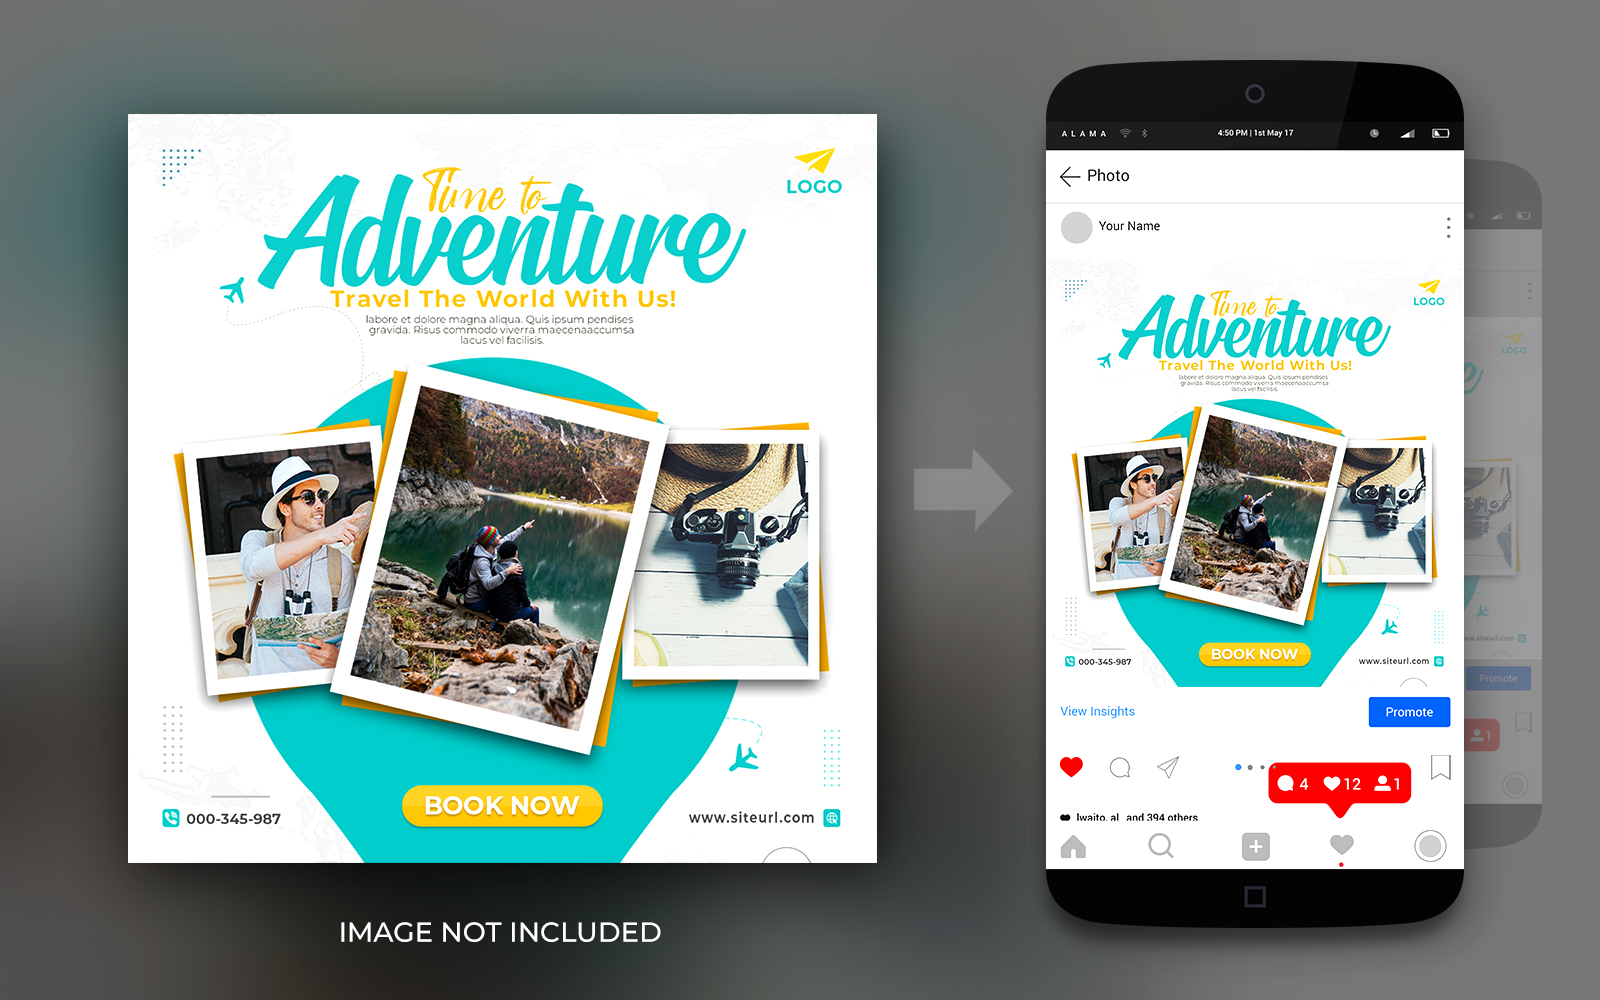 Travel The World Adventure Social Media Instagram And Facebook Post Square Flyer Design Template